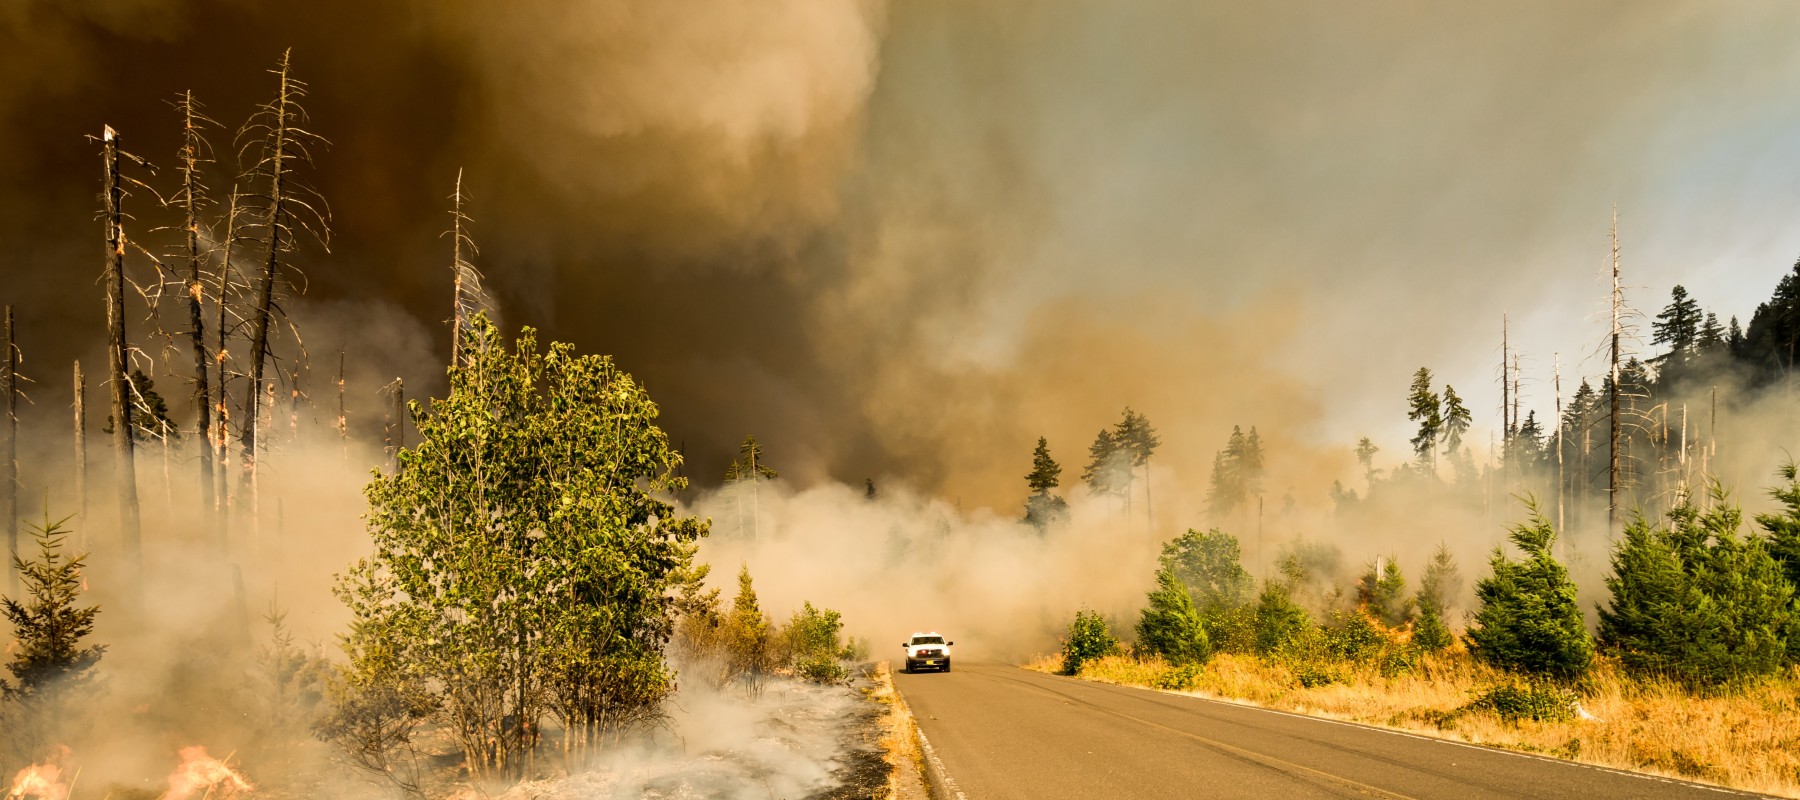 Webinar: Utility Climate Action - Heat and Wildfire